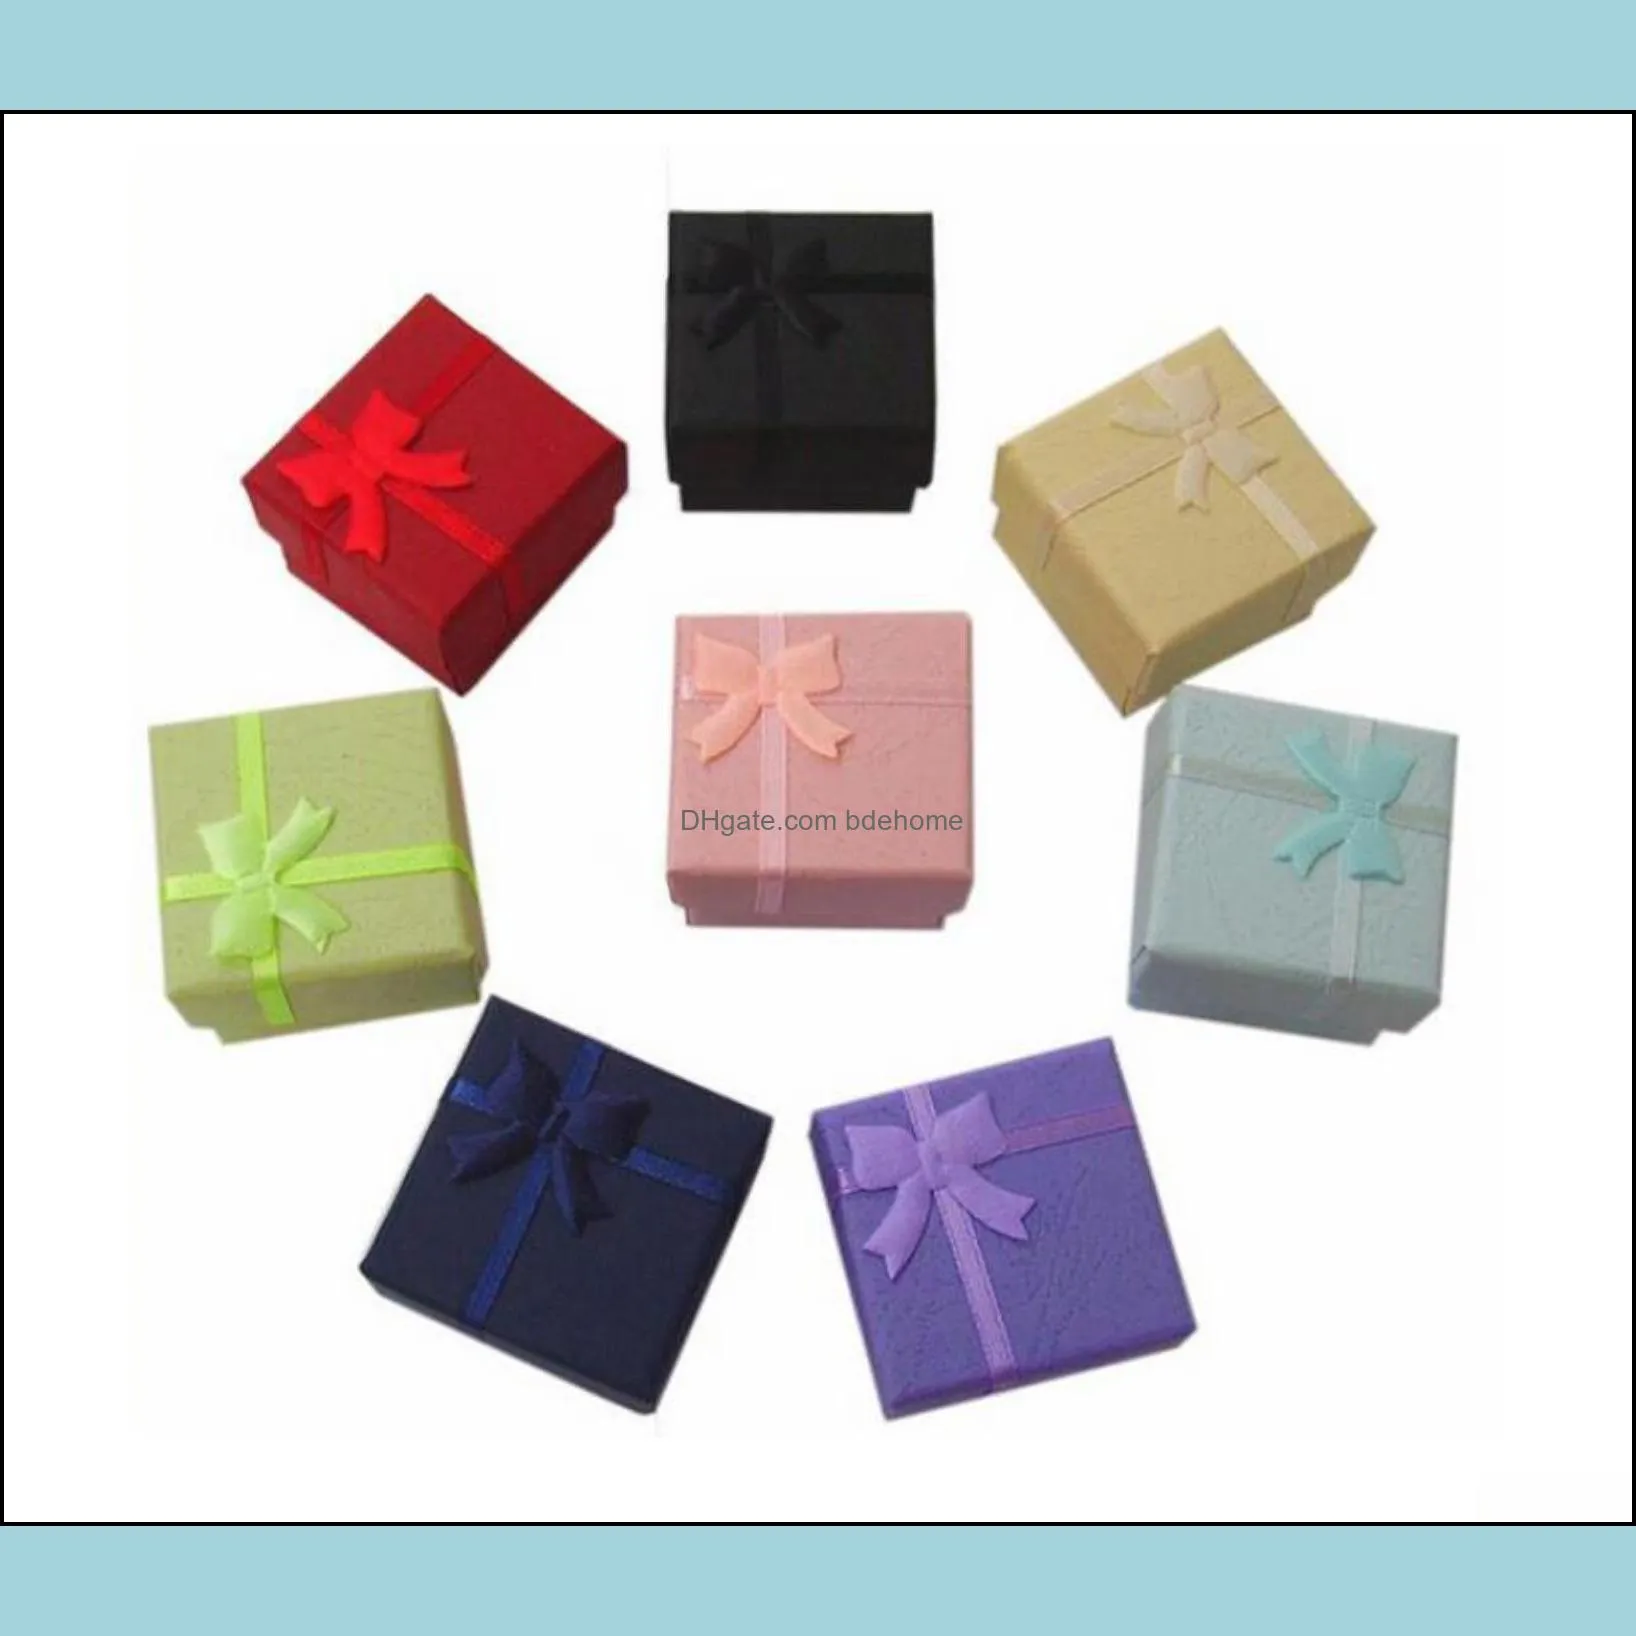 Boxes Packaging & Display Jewelrywholesale 50 Pcs /Lot Square Ring Earring Necklace Jewelry Box Gift Present Case Holder Set W334 Ayepd